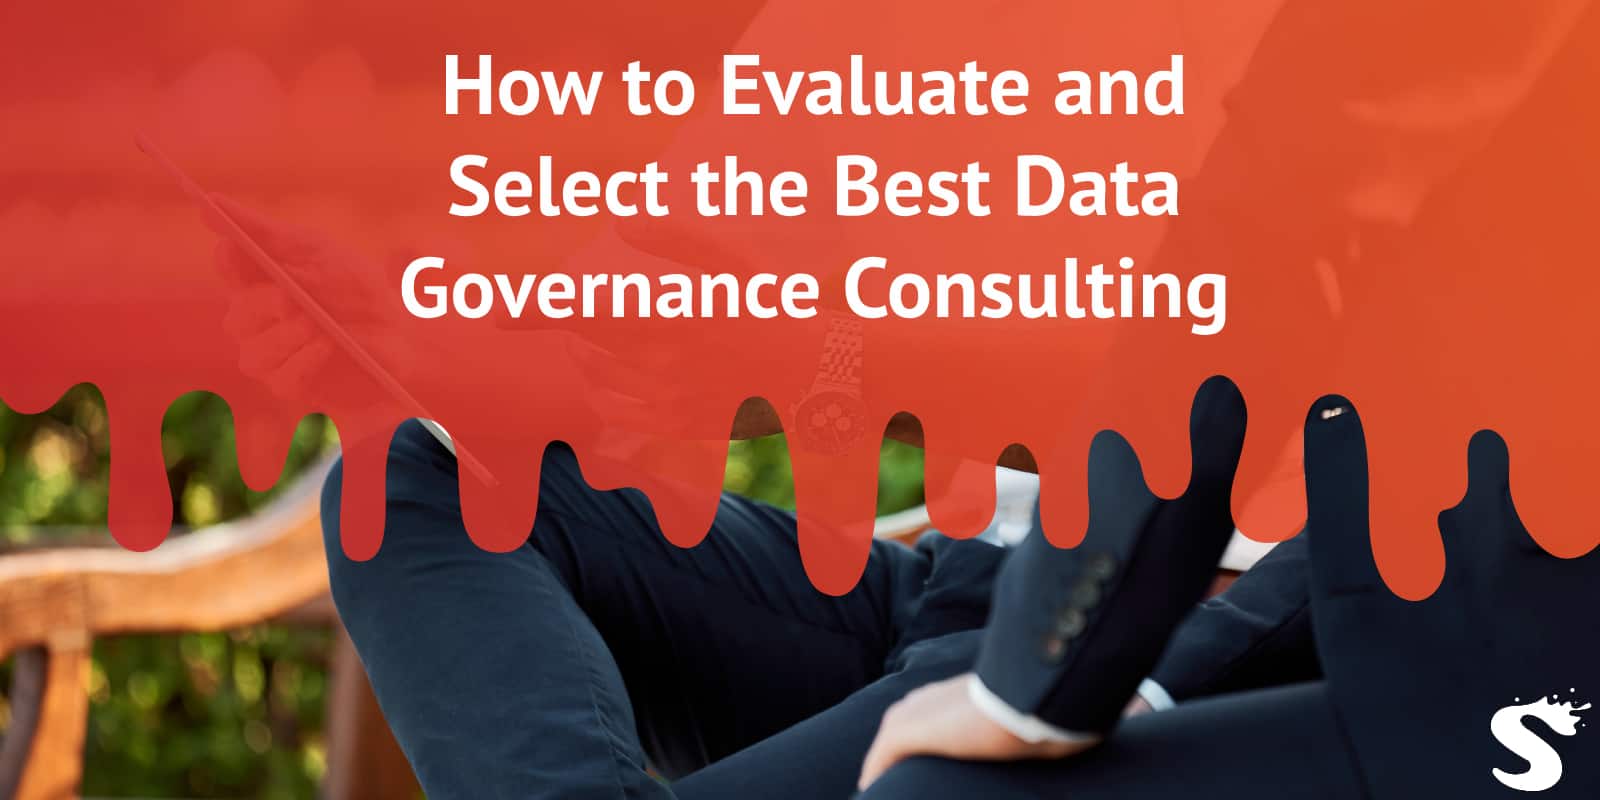 How to Evaluate and Select the Best Data Governance Consulting Services